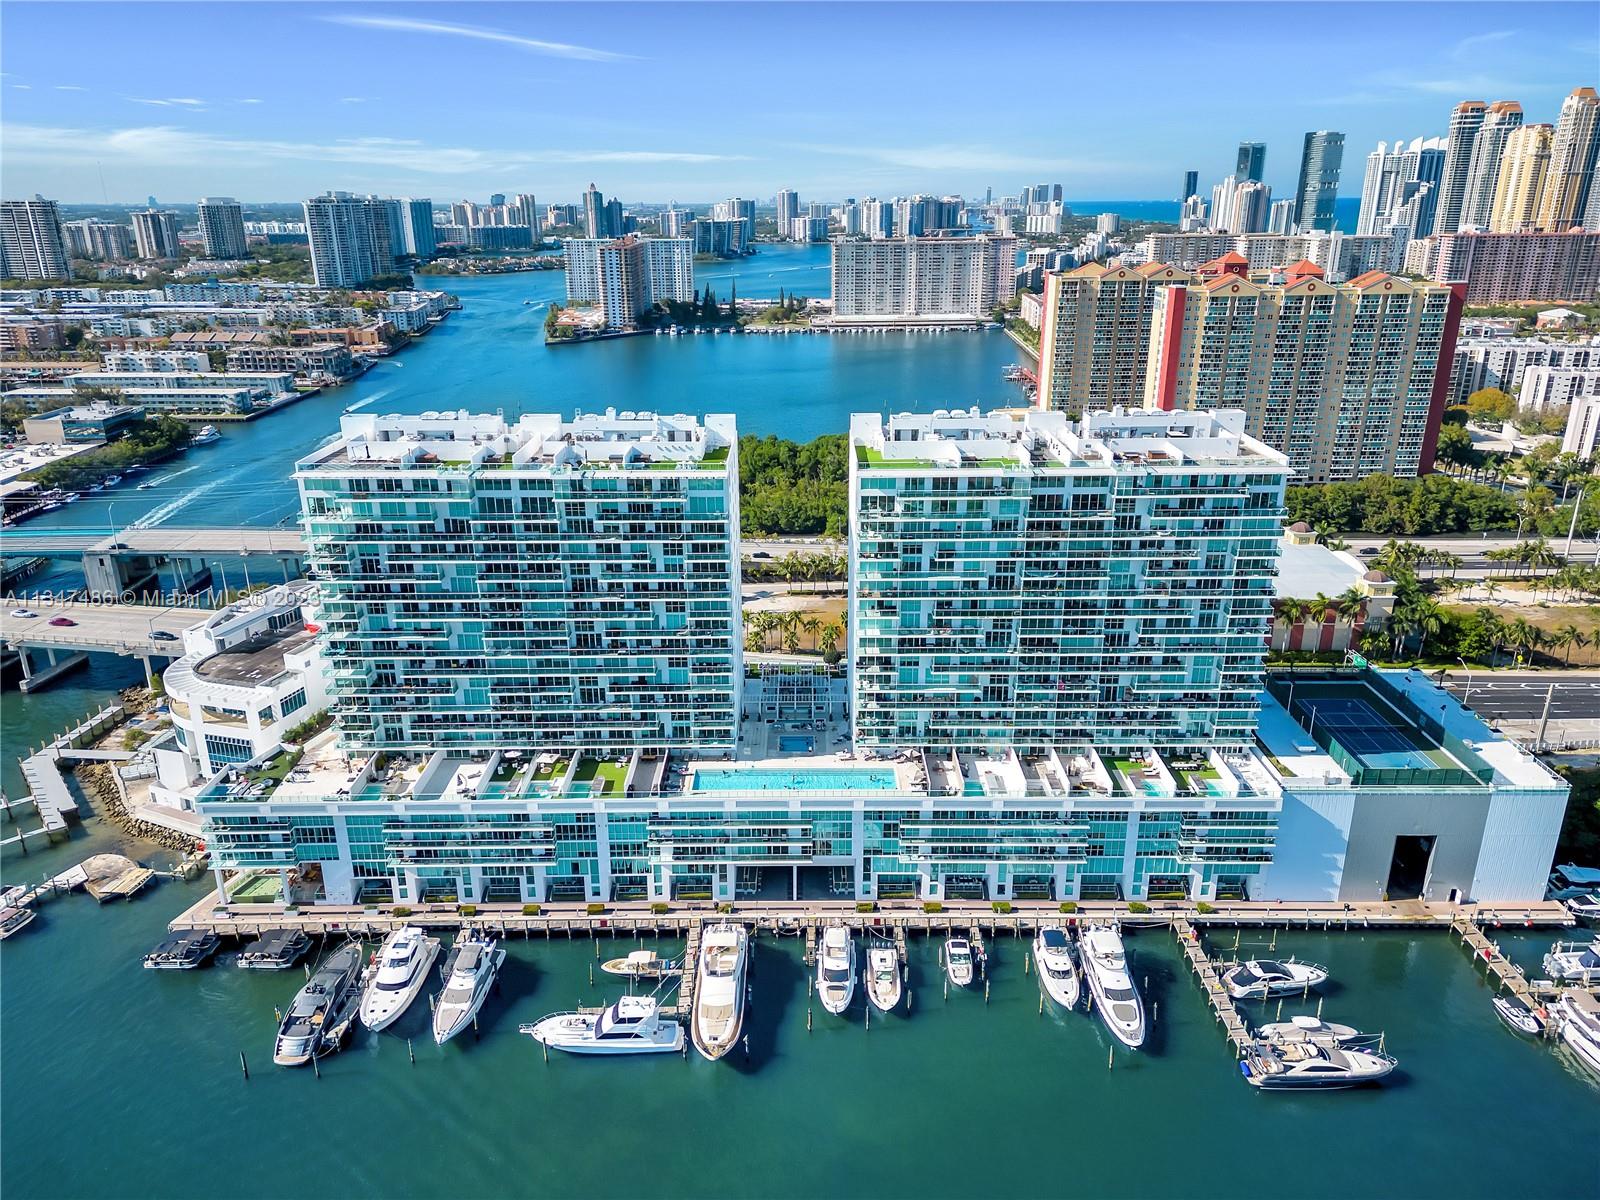 Spectacular corner unit- flow through floor plan, direct view to the bay and marina. 400 Sunny Isles offers a resort life style and features. a dry and wet marina, state of the art gym and spa, one clay tennis court, bay front pool, sauna, steam room, outside Jacuzzi, pool bar, full time concierge. 
The unit has Italian porcelain floors, Italian kitchen cabinets. and European appliances. MUST SEE. One of the best floor plans in the building and one of the best views!!